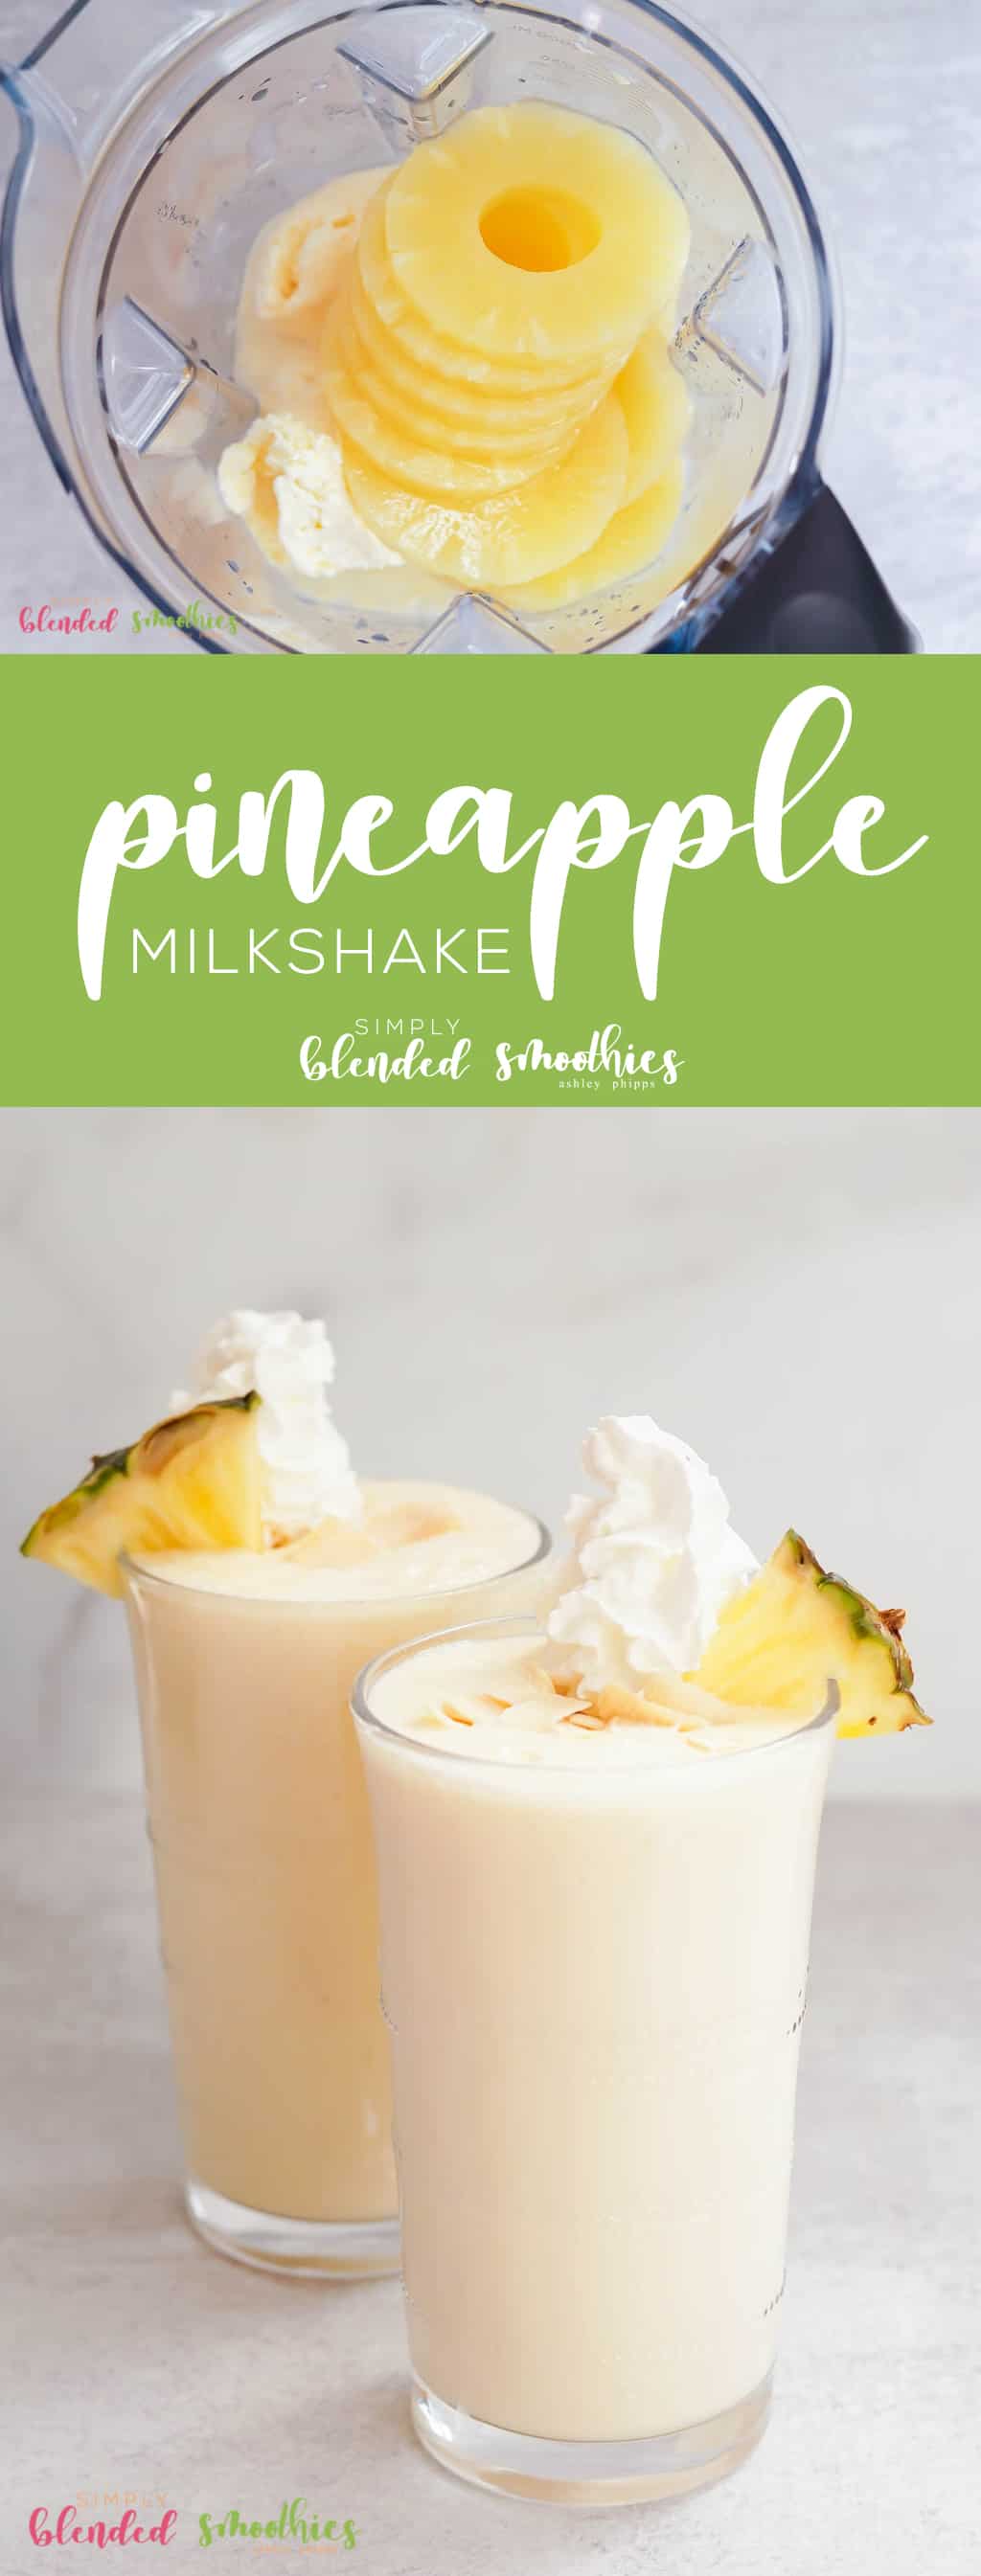 This Pineapple Milkshake Is One Of My Familys Favorite Milkshake Recipes Because It Is The Perfect Blend Of Sweet And Tart Thanks To A Secret Ingredient